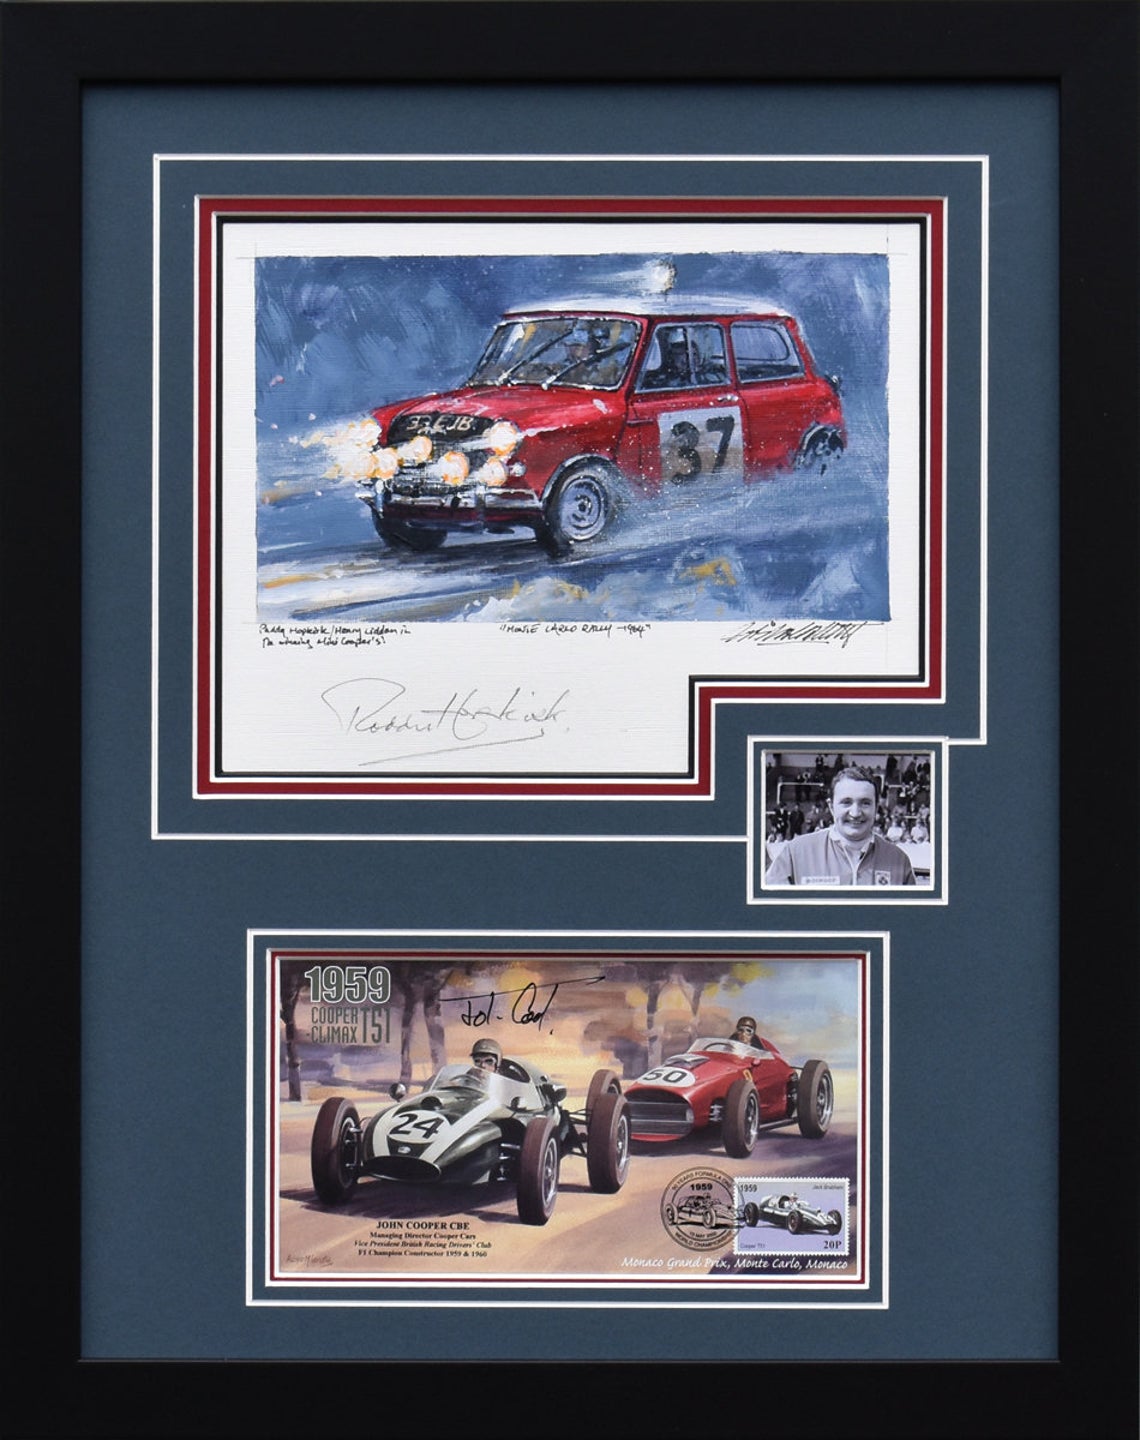 Paddy Hopkirk & John Cooper Commemorative Series – Highly-restricted